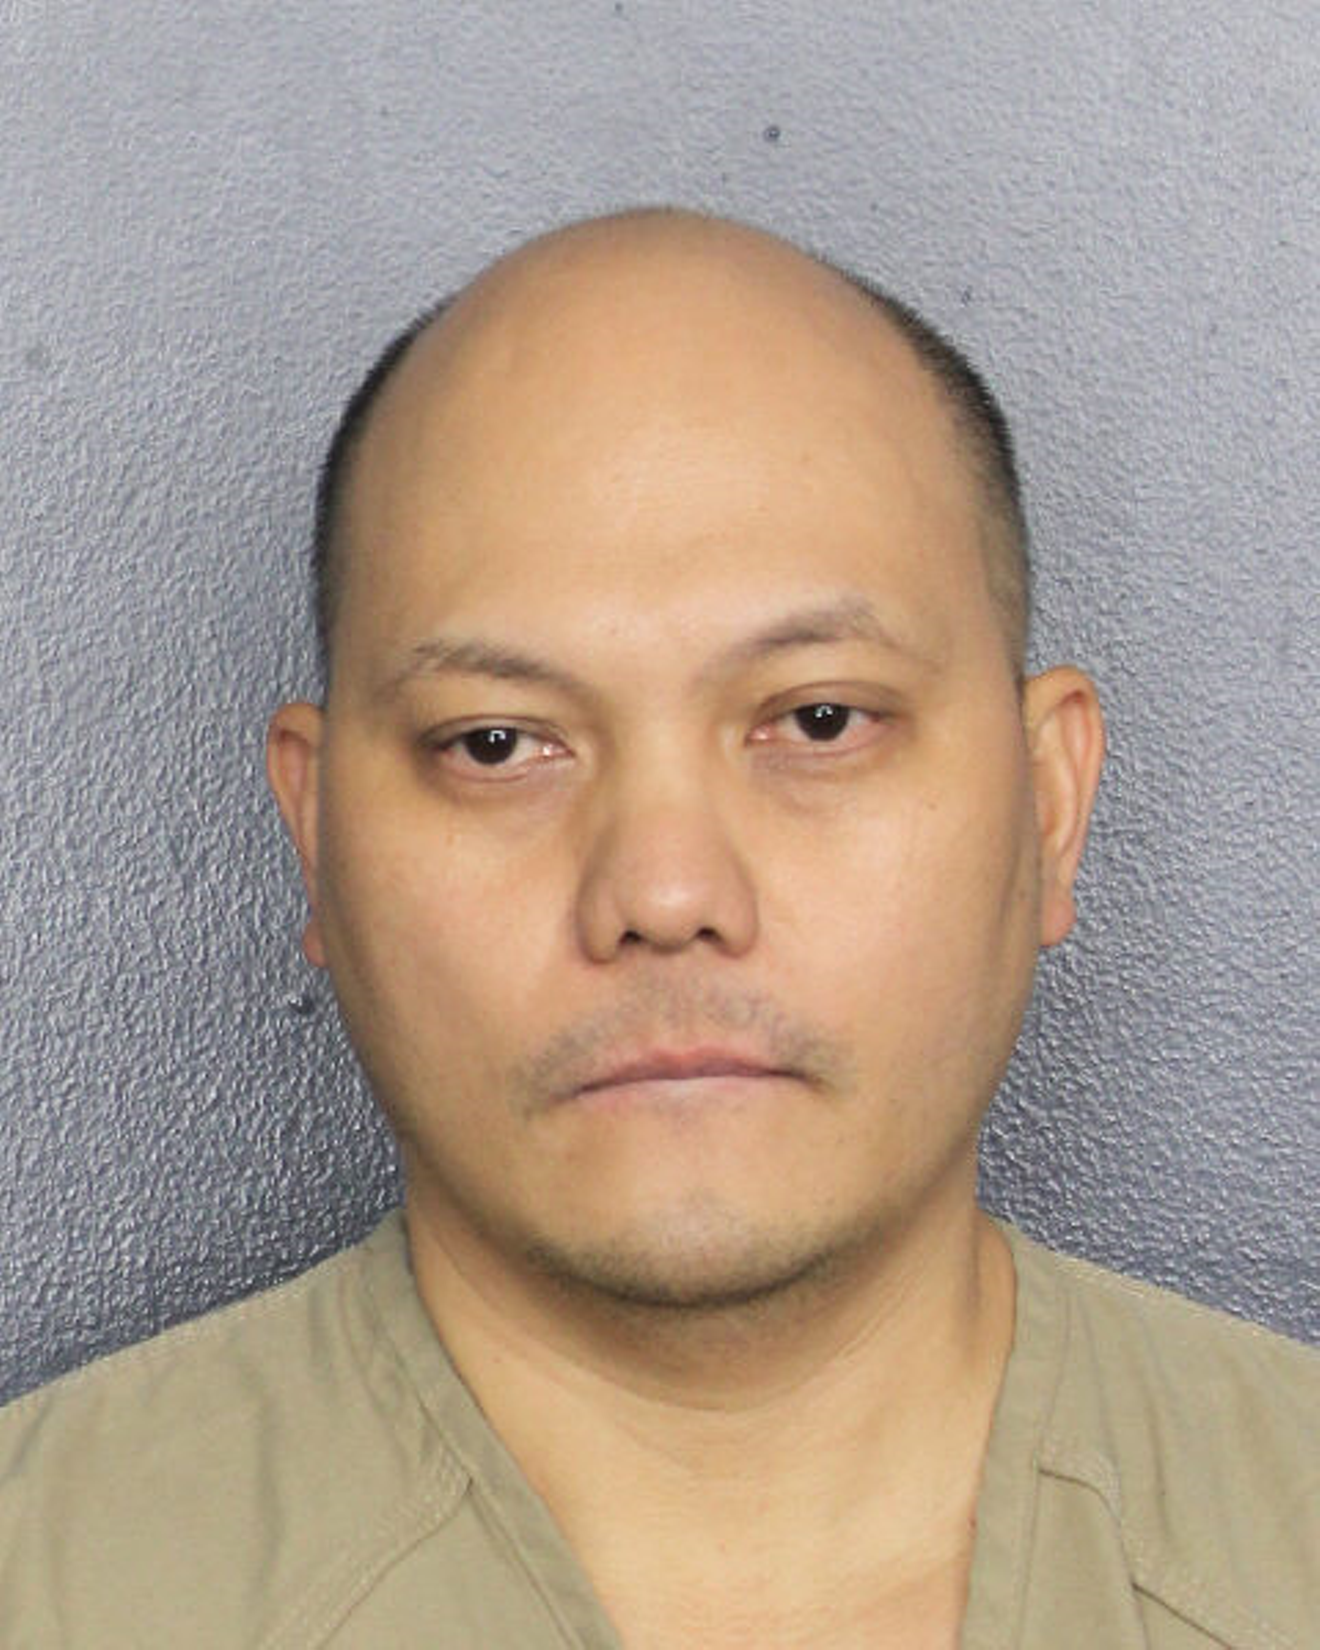 Tirso Neri booked into the Broward Sheriff's Office Main Jail on April 15 on child porn charges